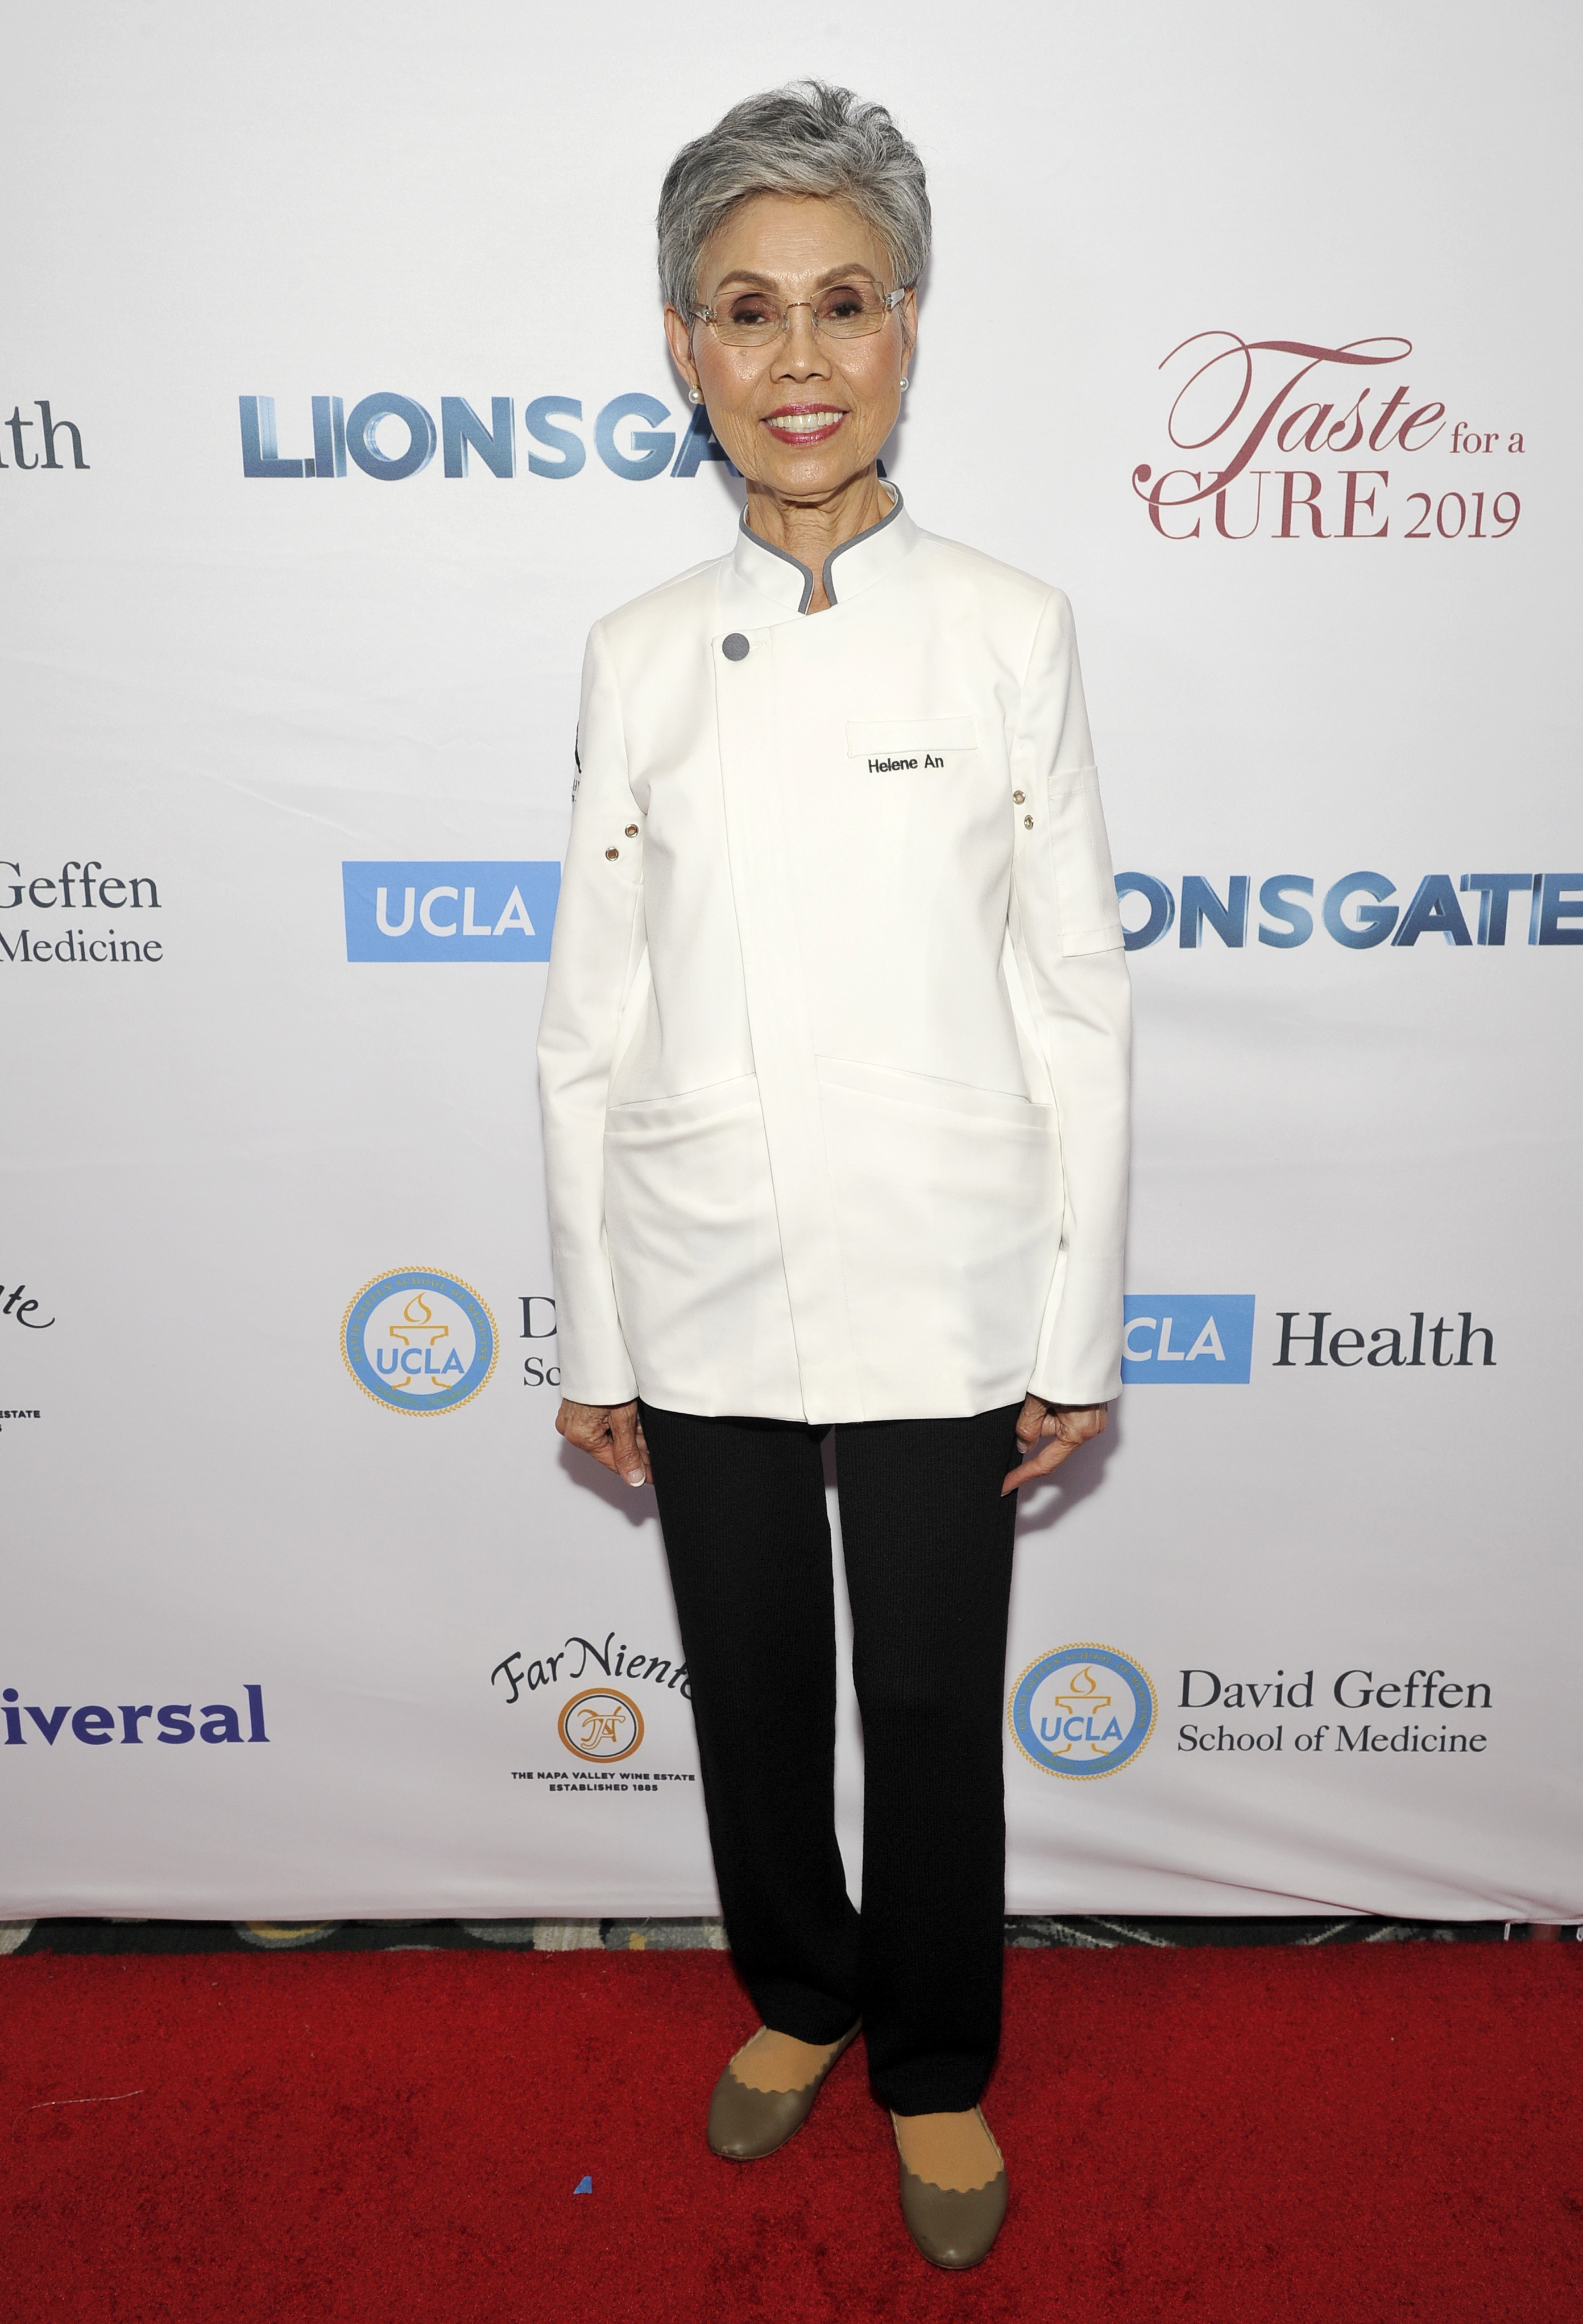 UCLA Jonsson Cancer Center Foundation Hosts 24th Annual “Taste For A Cure” Event Honoring President of Lionsgate Television Group, Sandra Stern